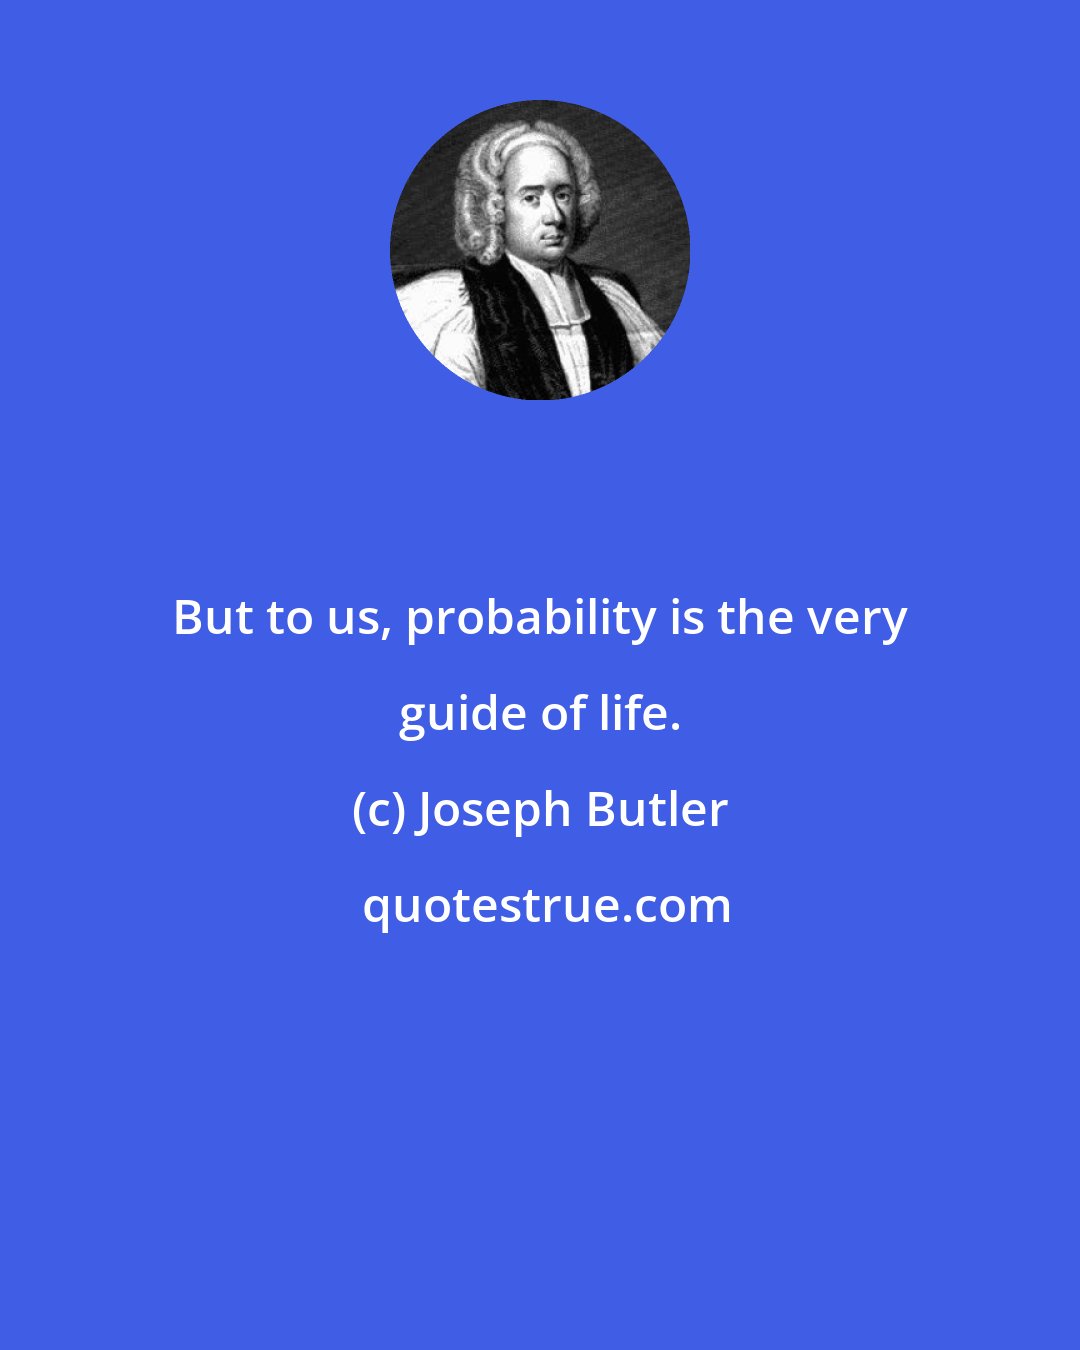 Joseph Butler: But to us, probability is the very guide of life.